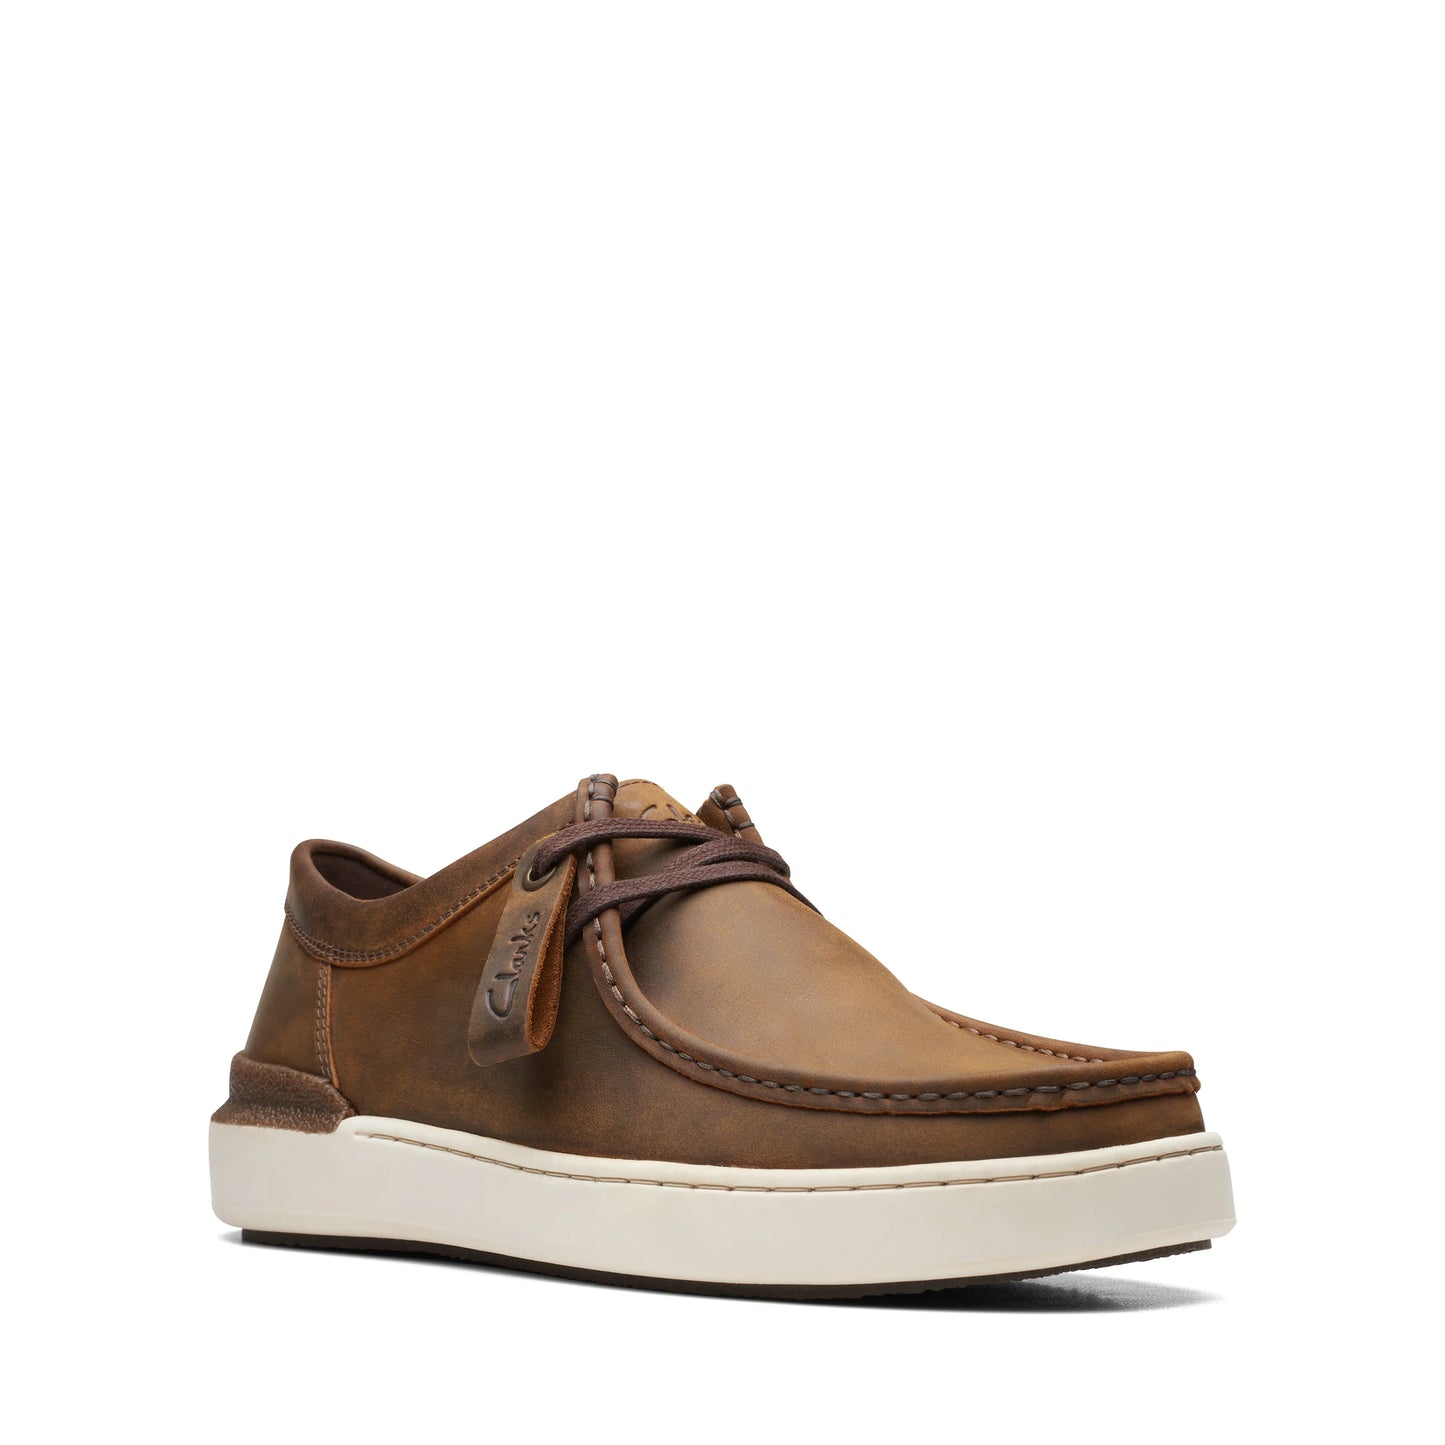 CLARKS | ZAPATOS DERBY HOMBRE | COURTLITE WALLY BEESWAX LEATHER | AMARILLO